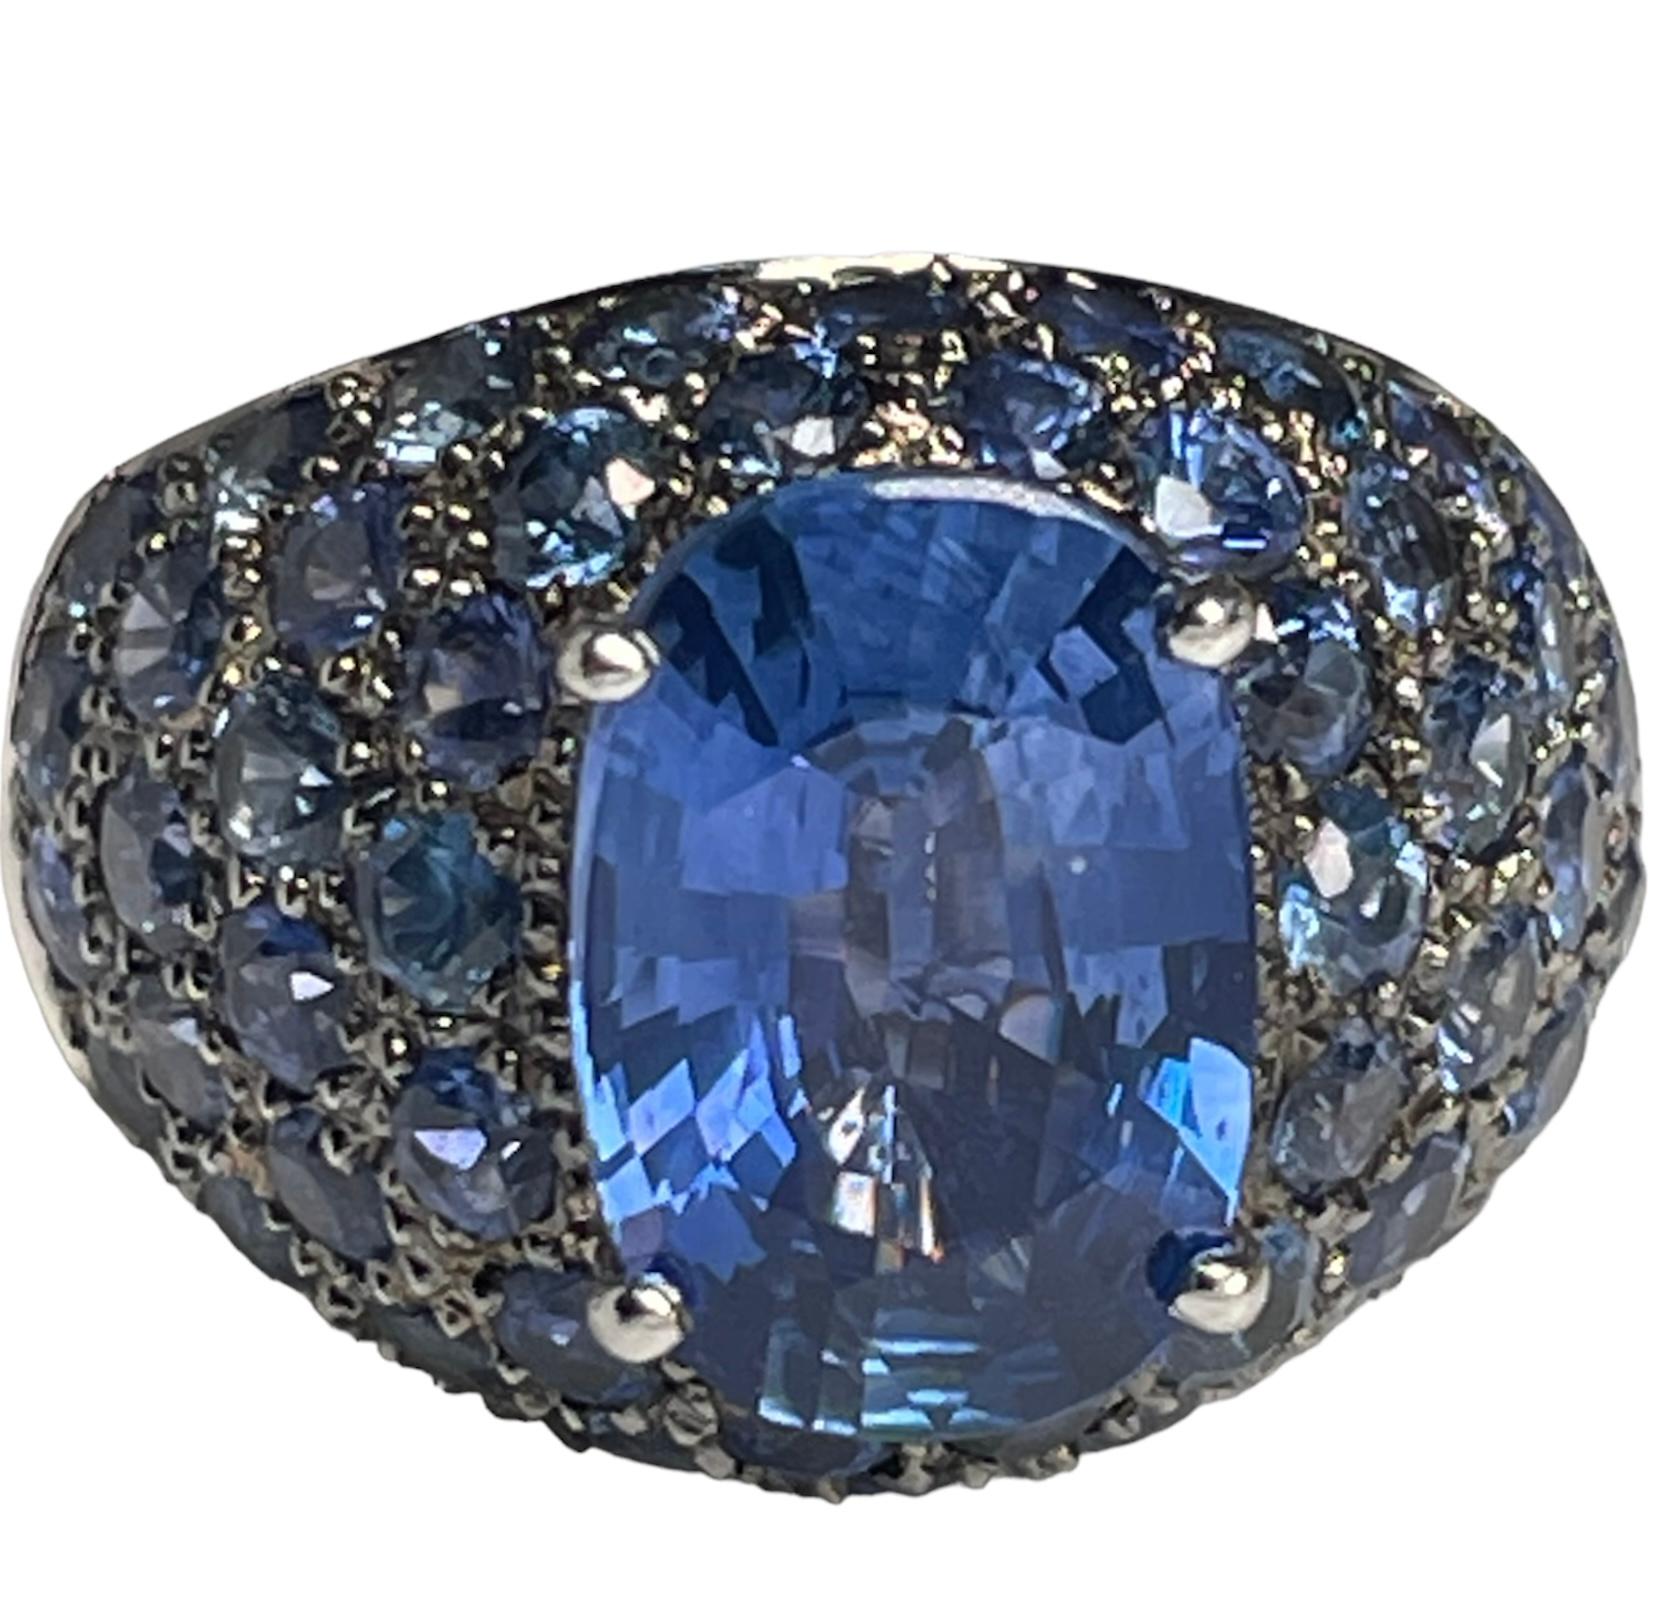 18K White Gold Blue Sapphires Dome Cocktail Ring In Good Condition For Sale In Guaynabo, PR